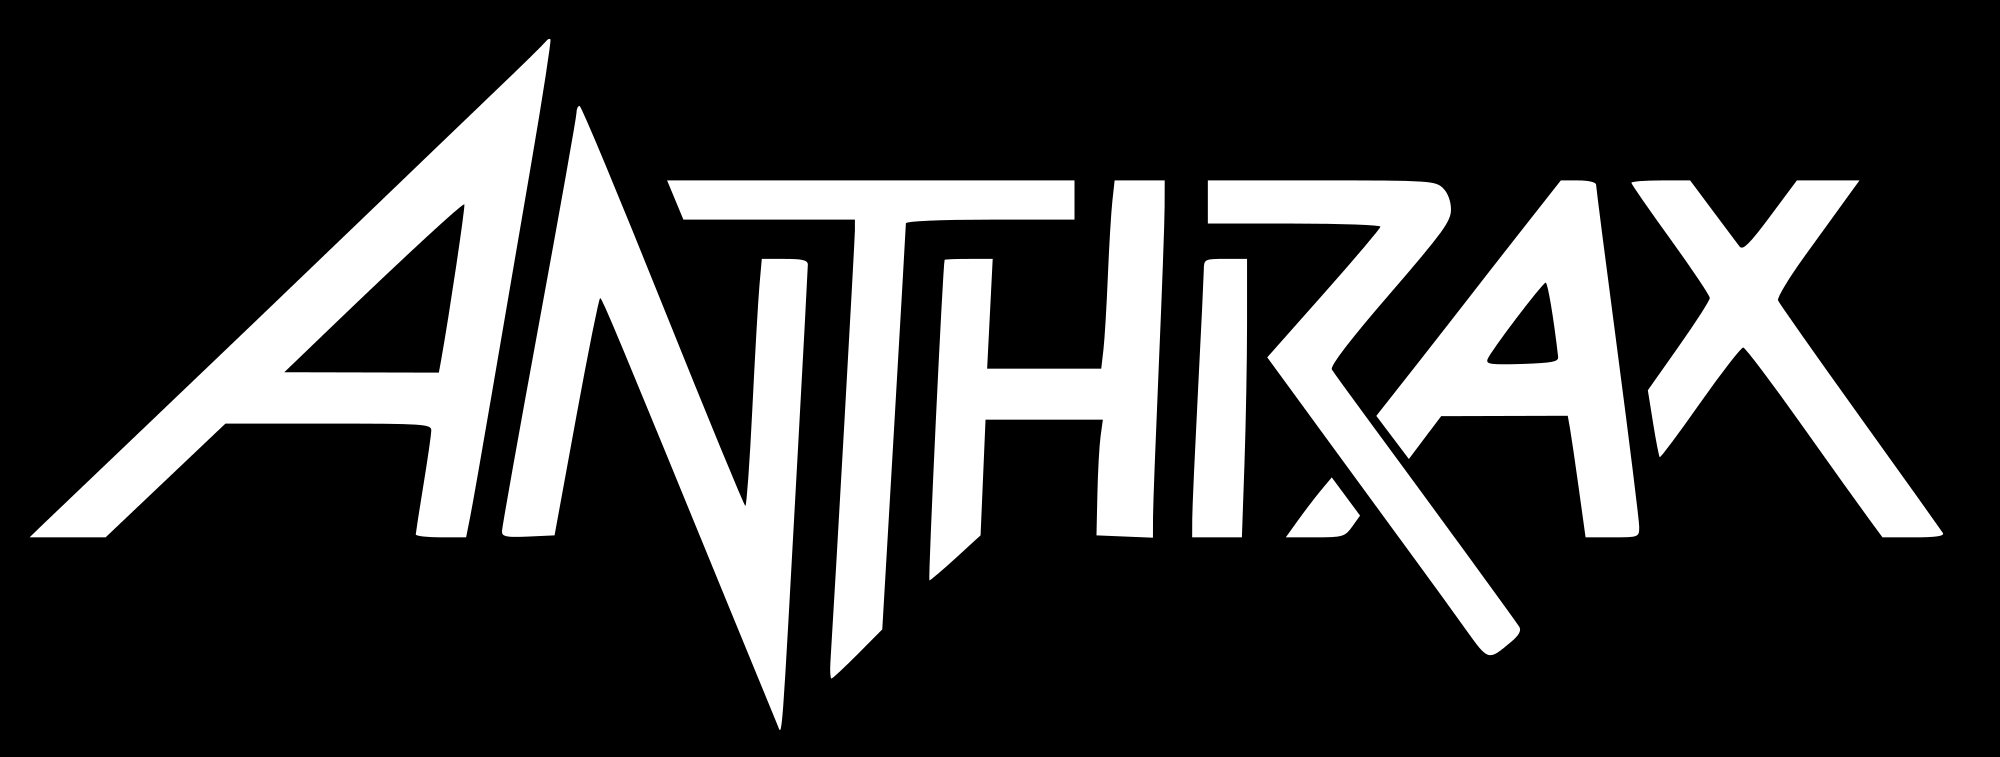 Anthrax Logo - File:Anthrax logo.svg - Wikimedia Commons